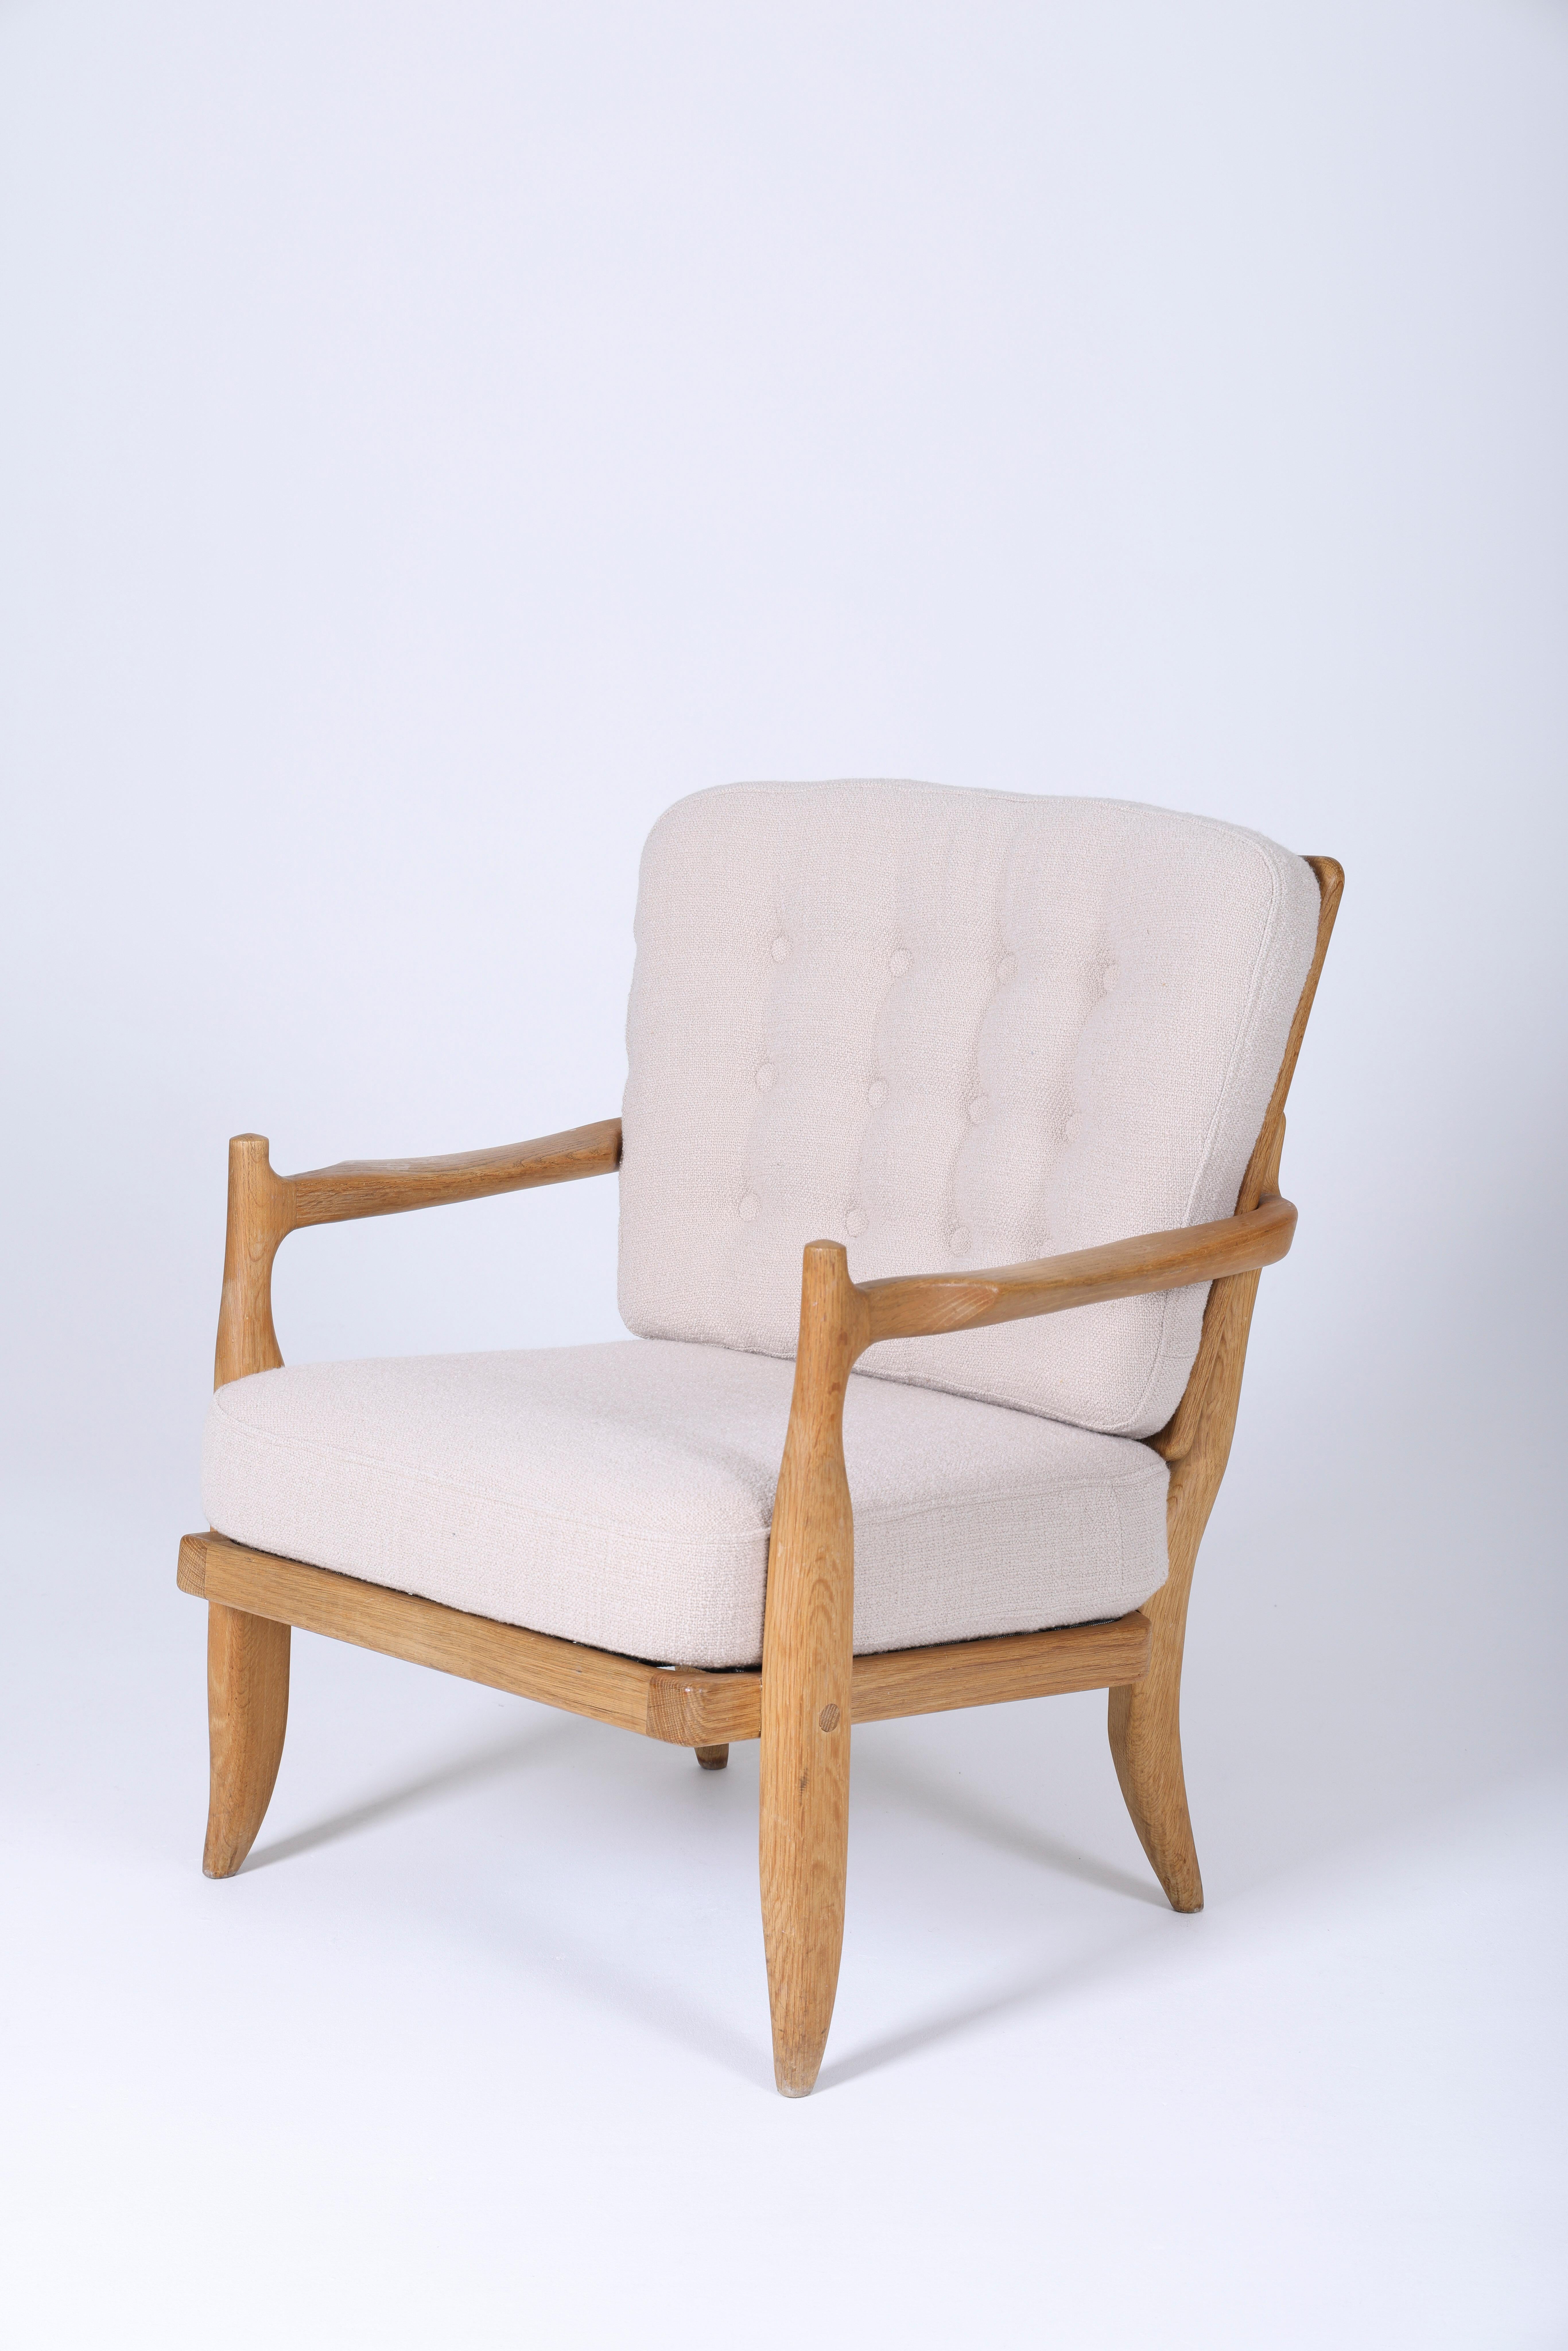 Knitting Armchair by Robert Guillerme and Jacques Chambron, published by Votre Maison, 1960. Oak structure, seat and back completely reupholstered in Dedar's Perfect Flower fabric. Very good condition.
LP585